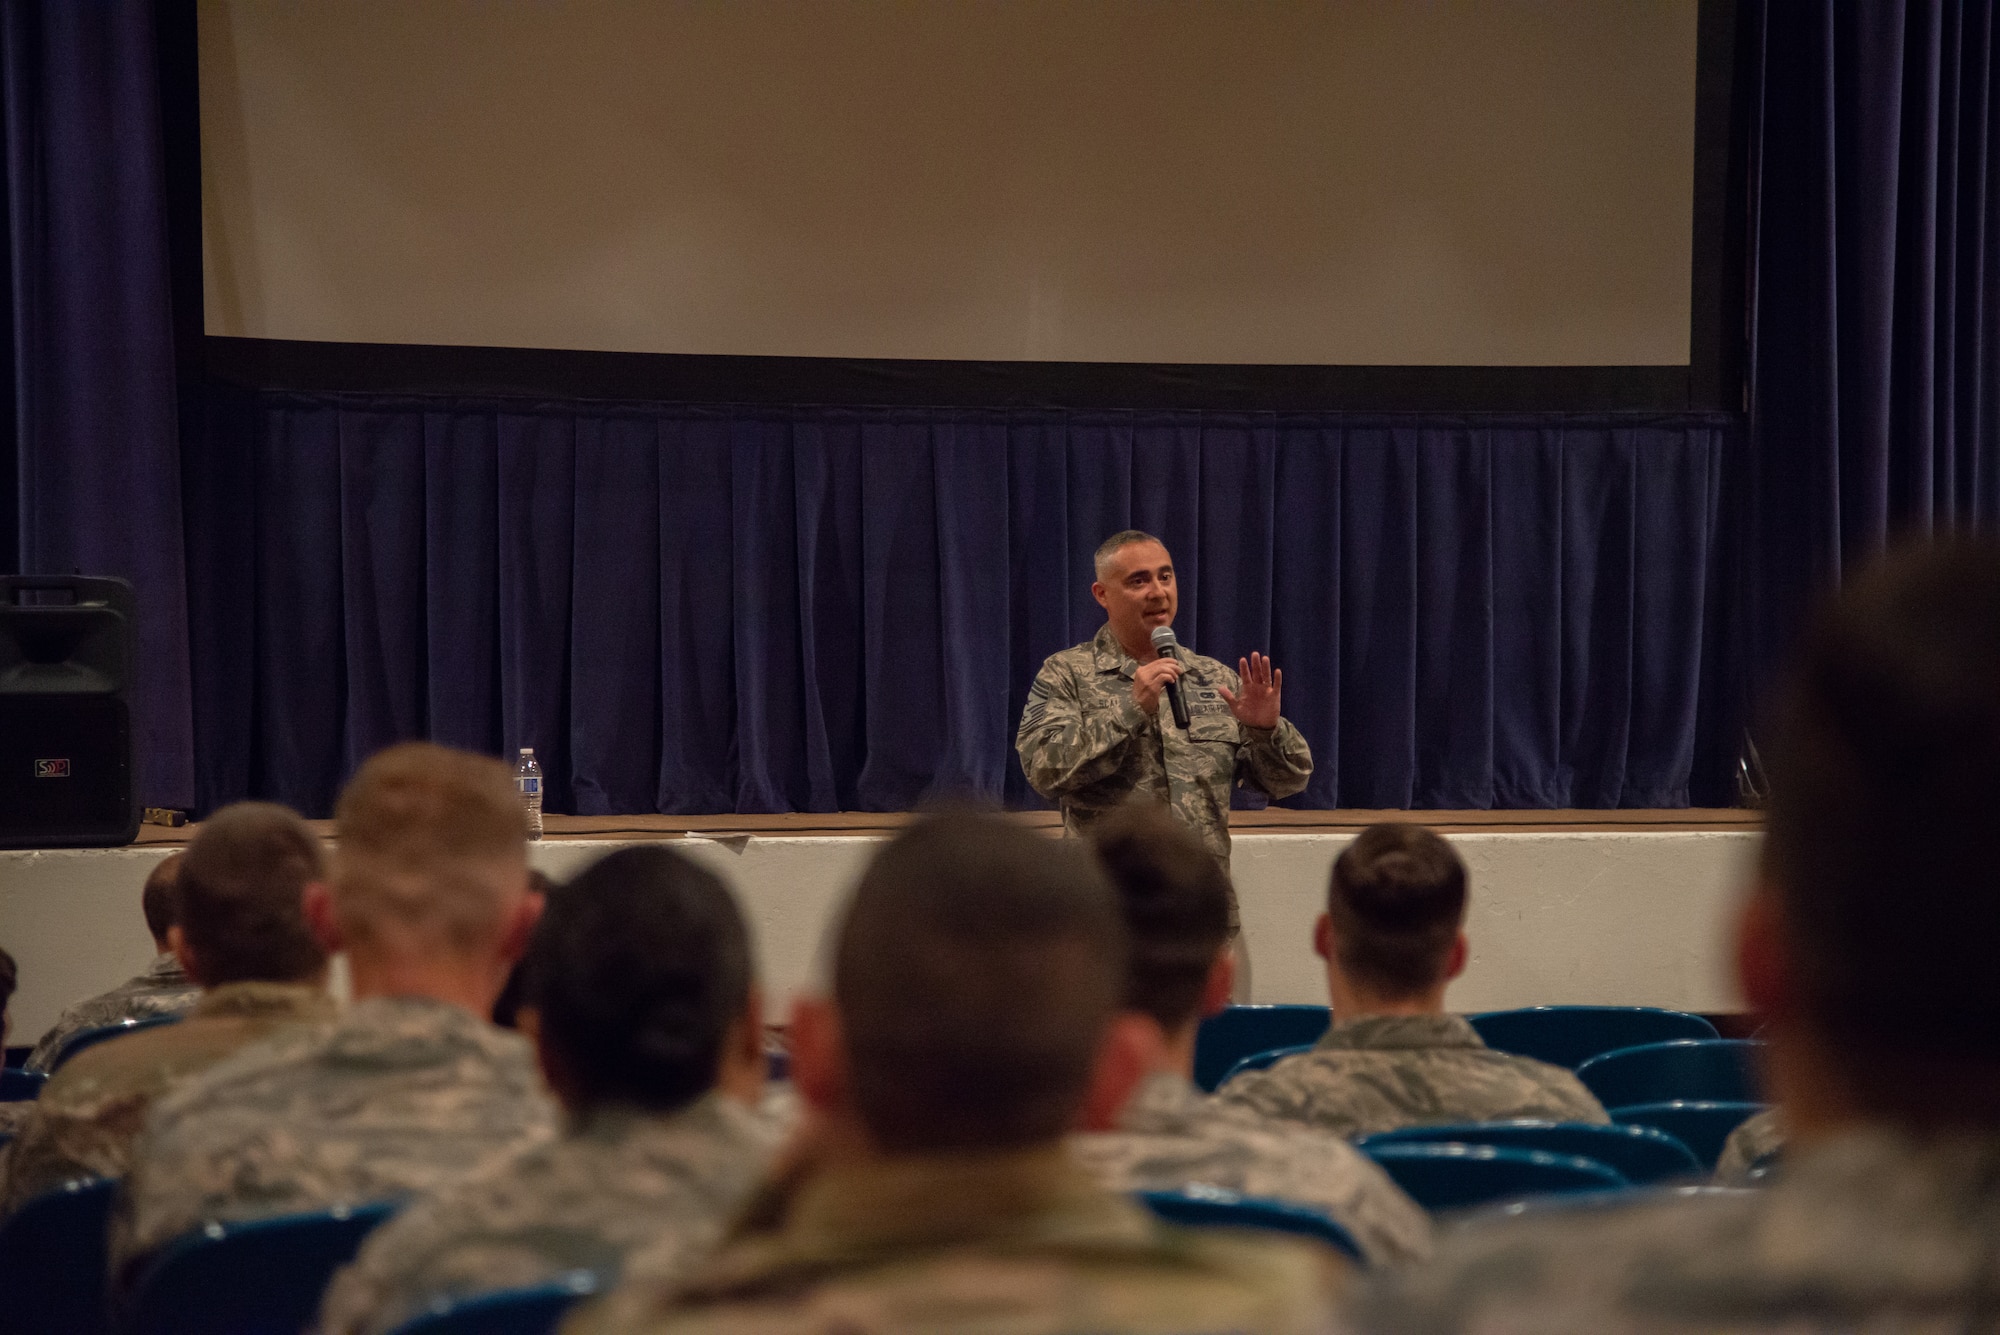 Chief Master Sgt. Kahn Scalise, the 302nd Airlift Wing command chief, addresses junior Reserve Citizen Airmen during an enlisted town hall meeting in the base theater June 1, 2019 at Peterson Air Force Base, Colorado.